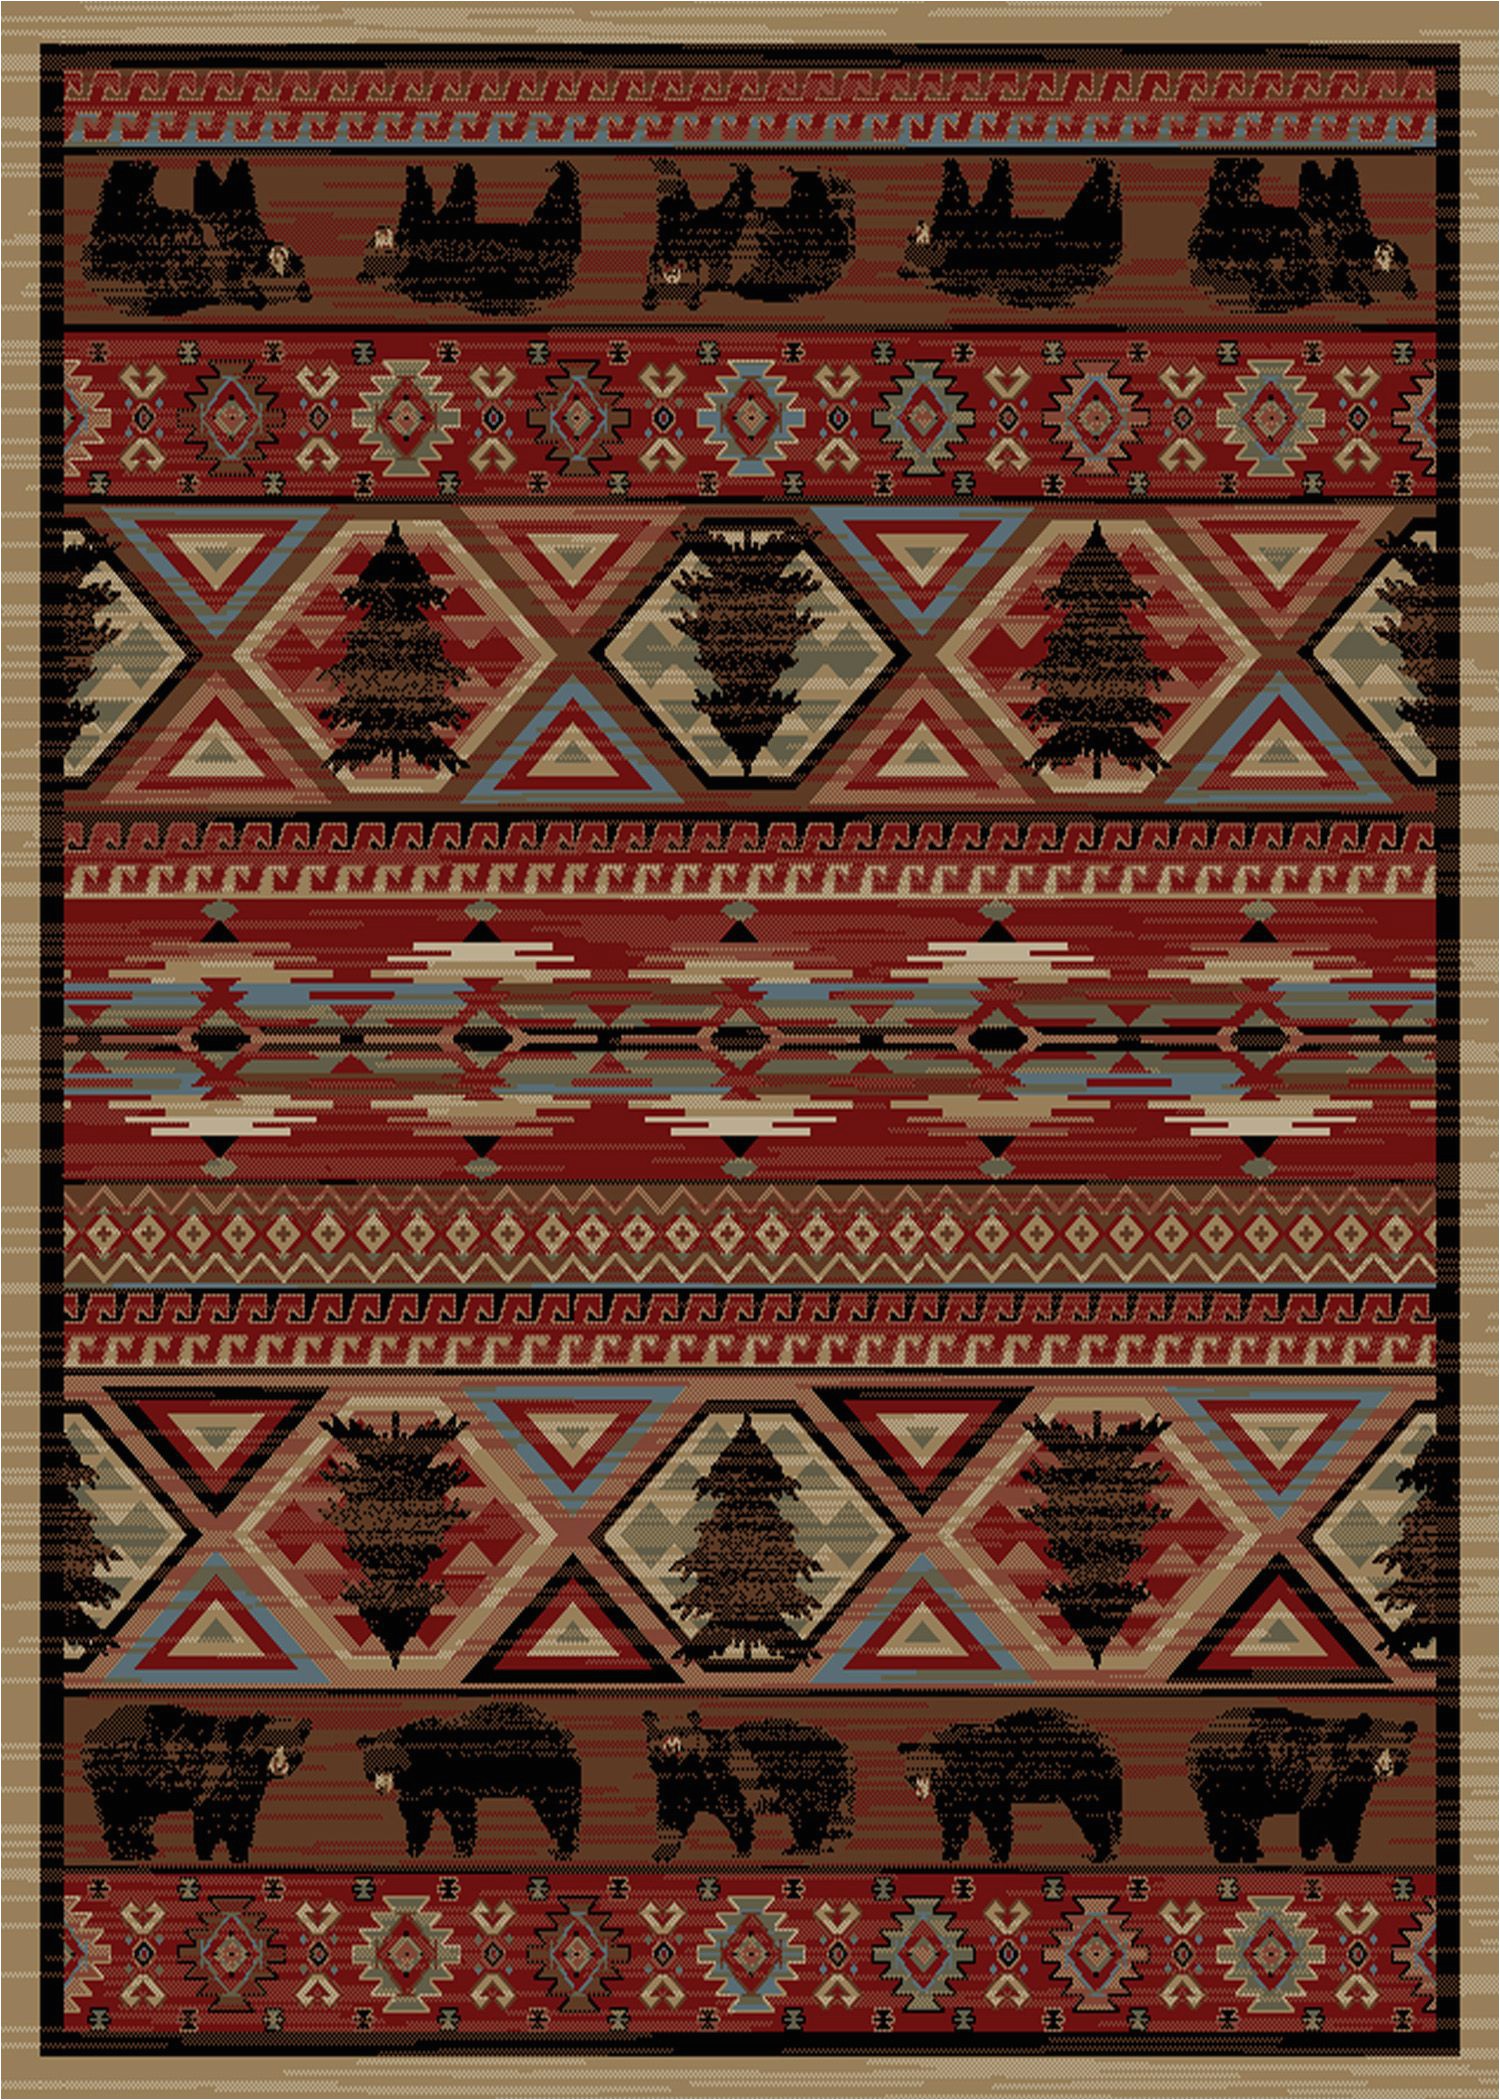 Red and Brown area Rugs Walmart Mayberry Red Pine Claret area Rug Walmart In 2020